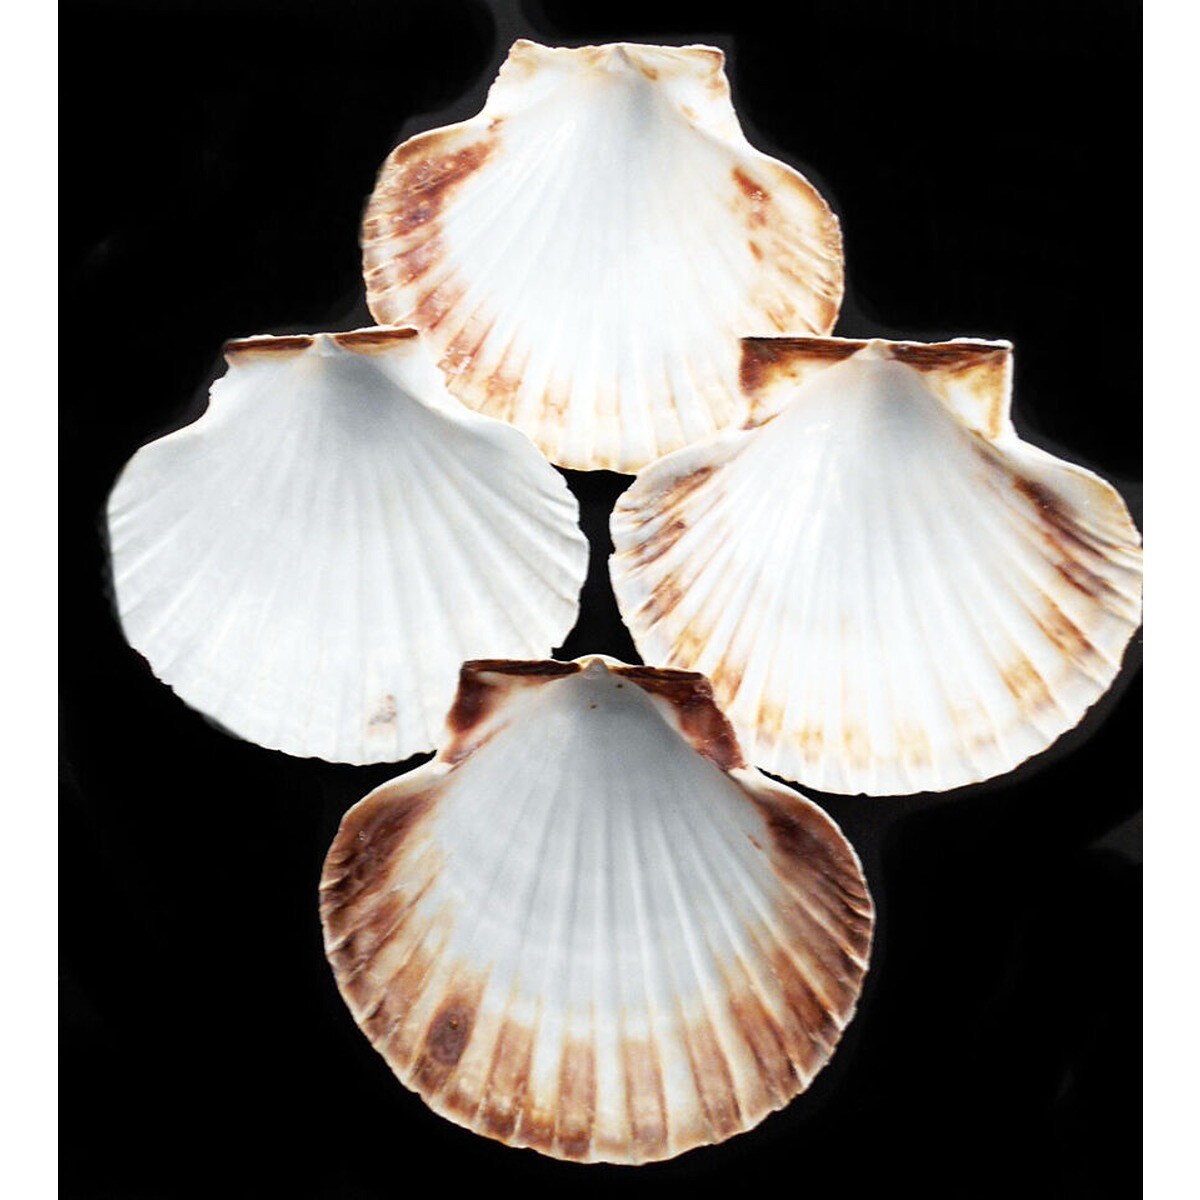 5 Inches Hoary Scallop Shells